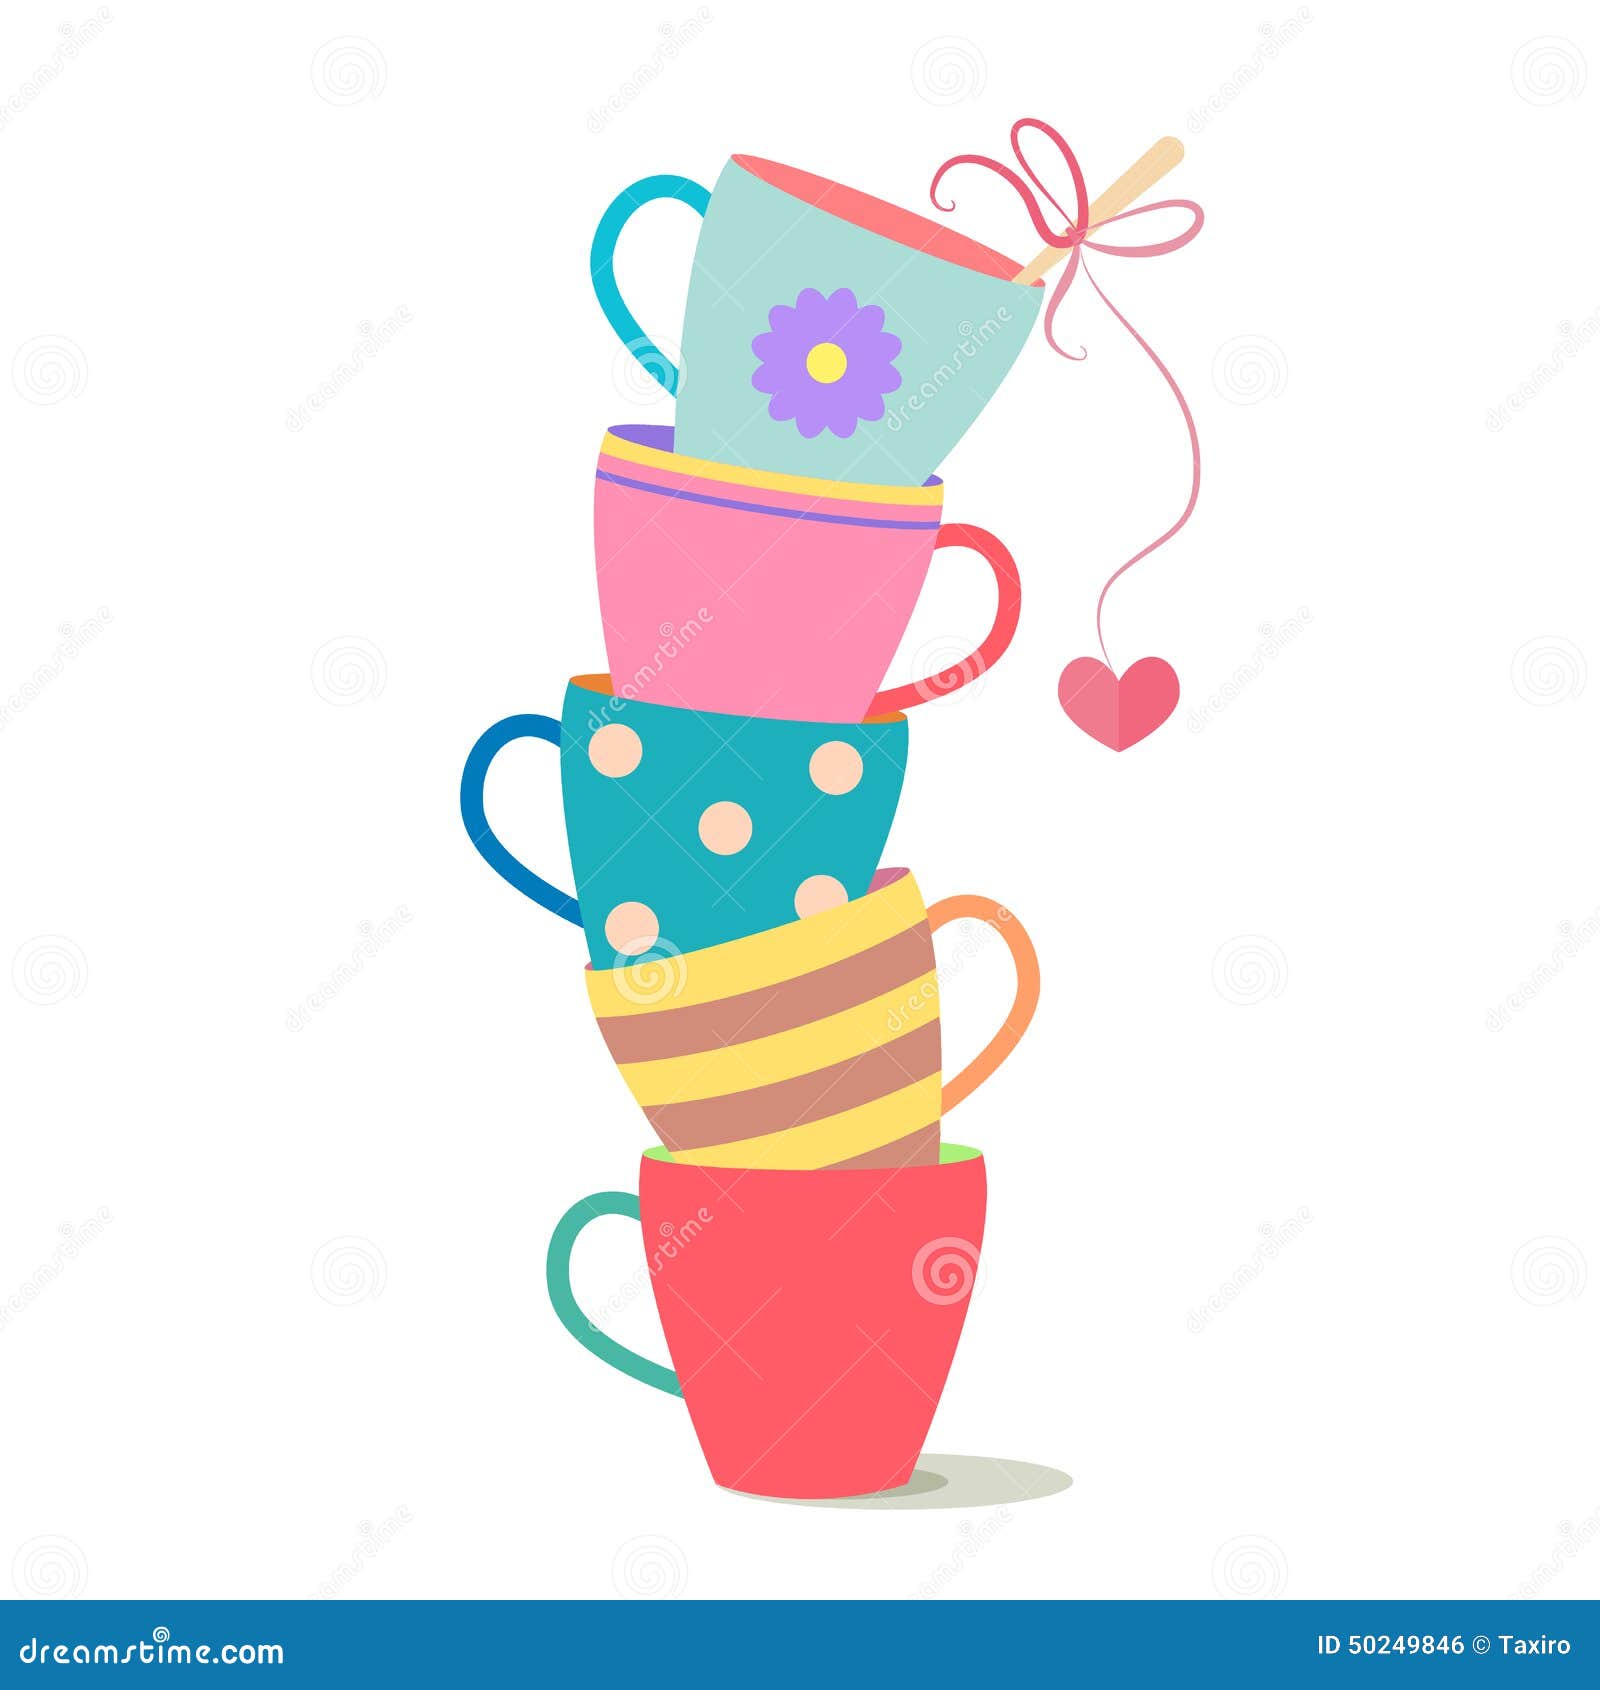 clip art cup stacking - photo #7